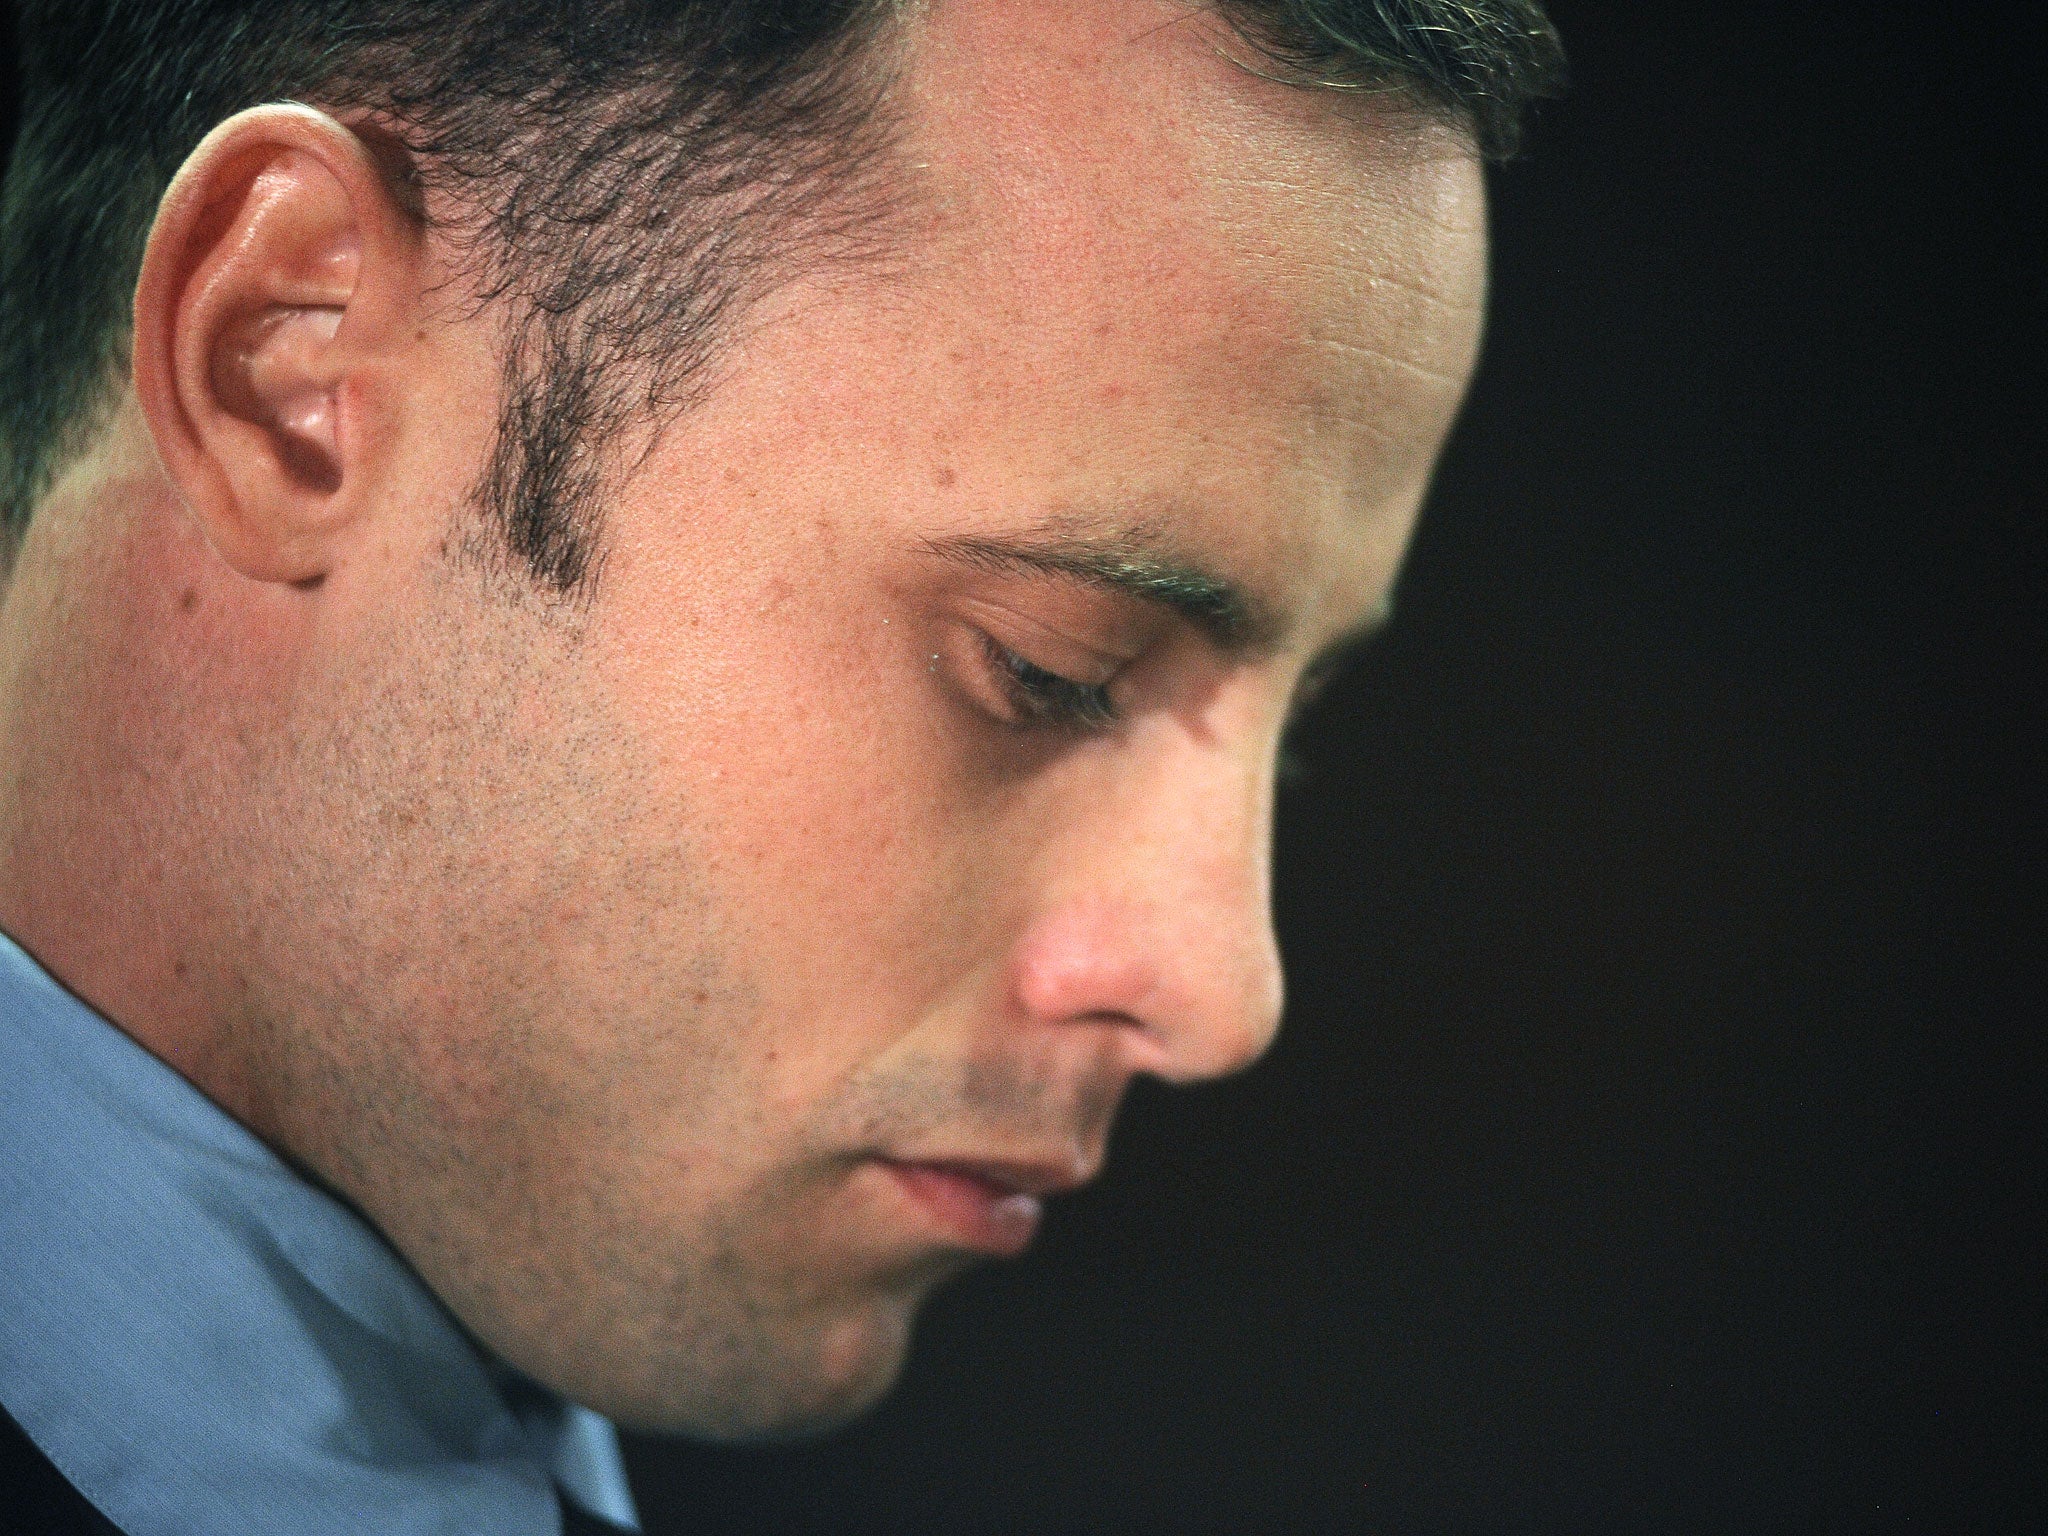 South African Olympic sprinter Oscar Pistorius appears at the Magistrate Court in Pretoria 